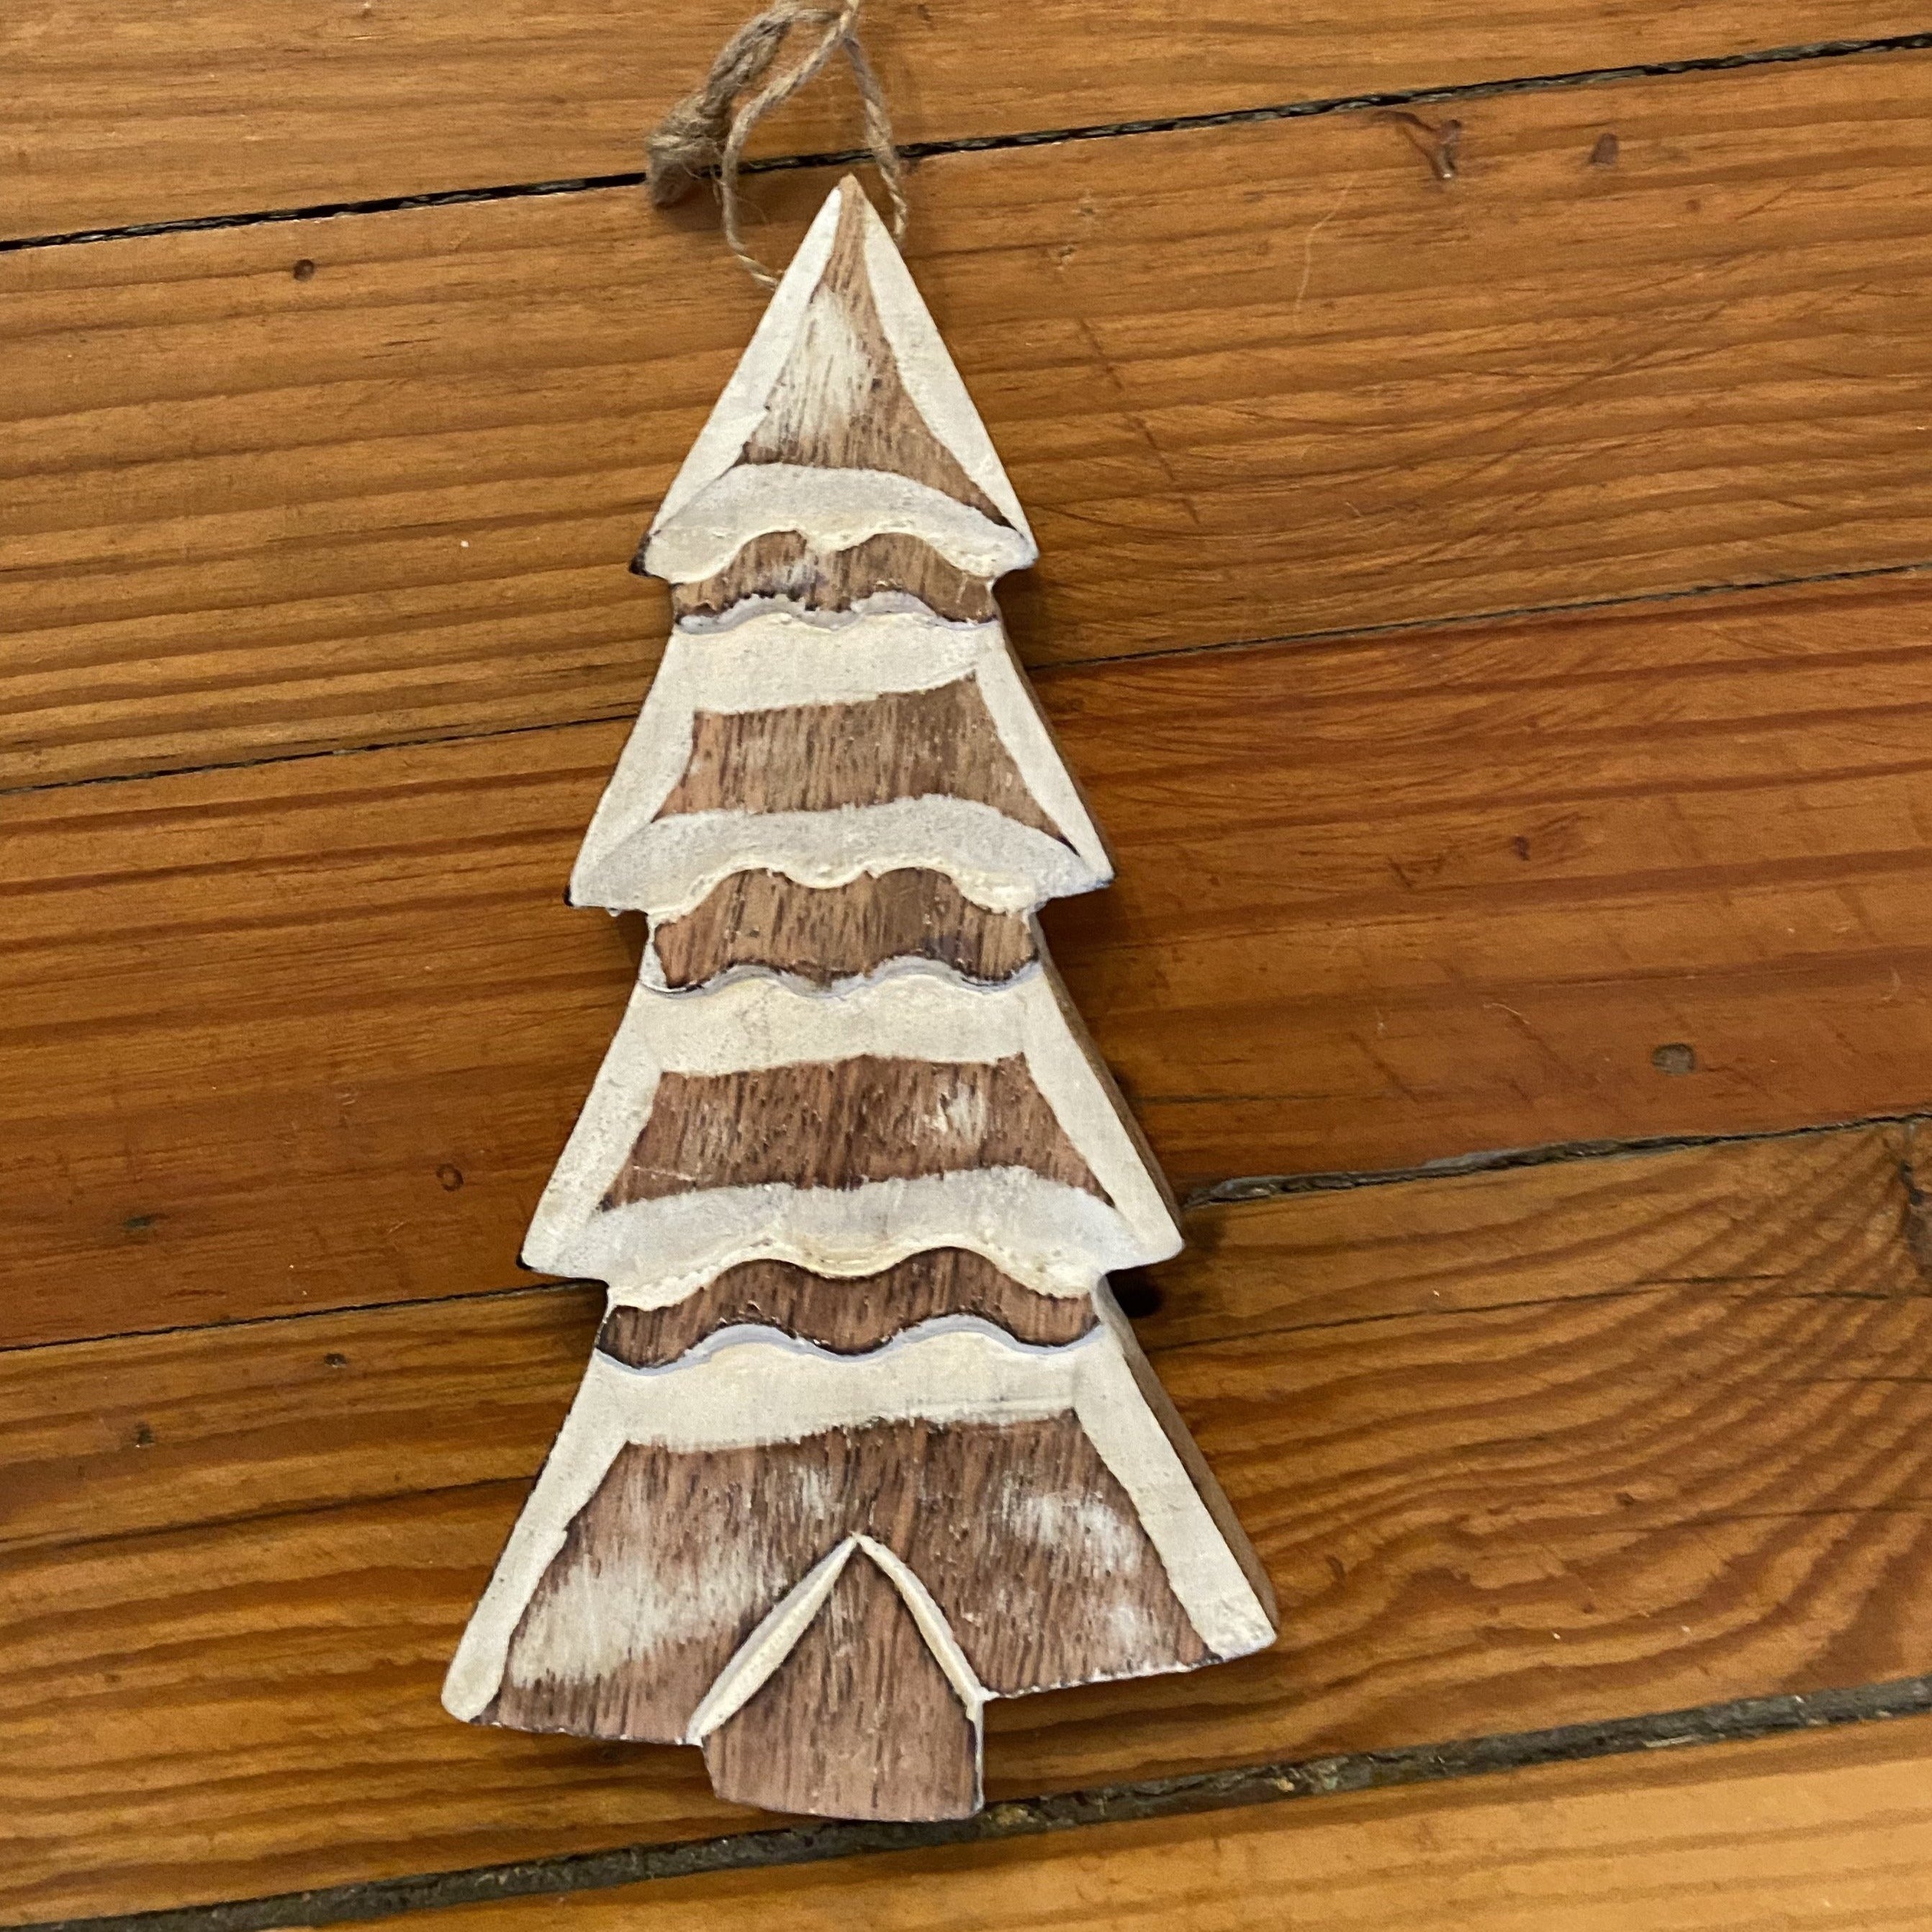 Wooden Christmas Tree Ornament with whitewash finish